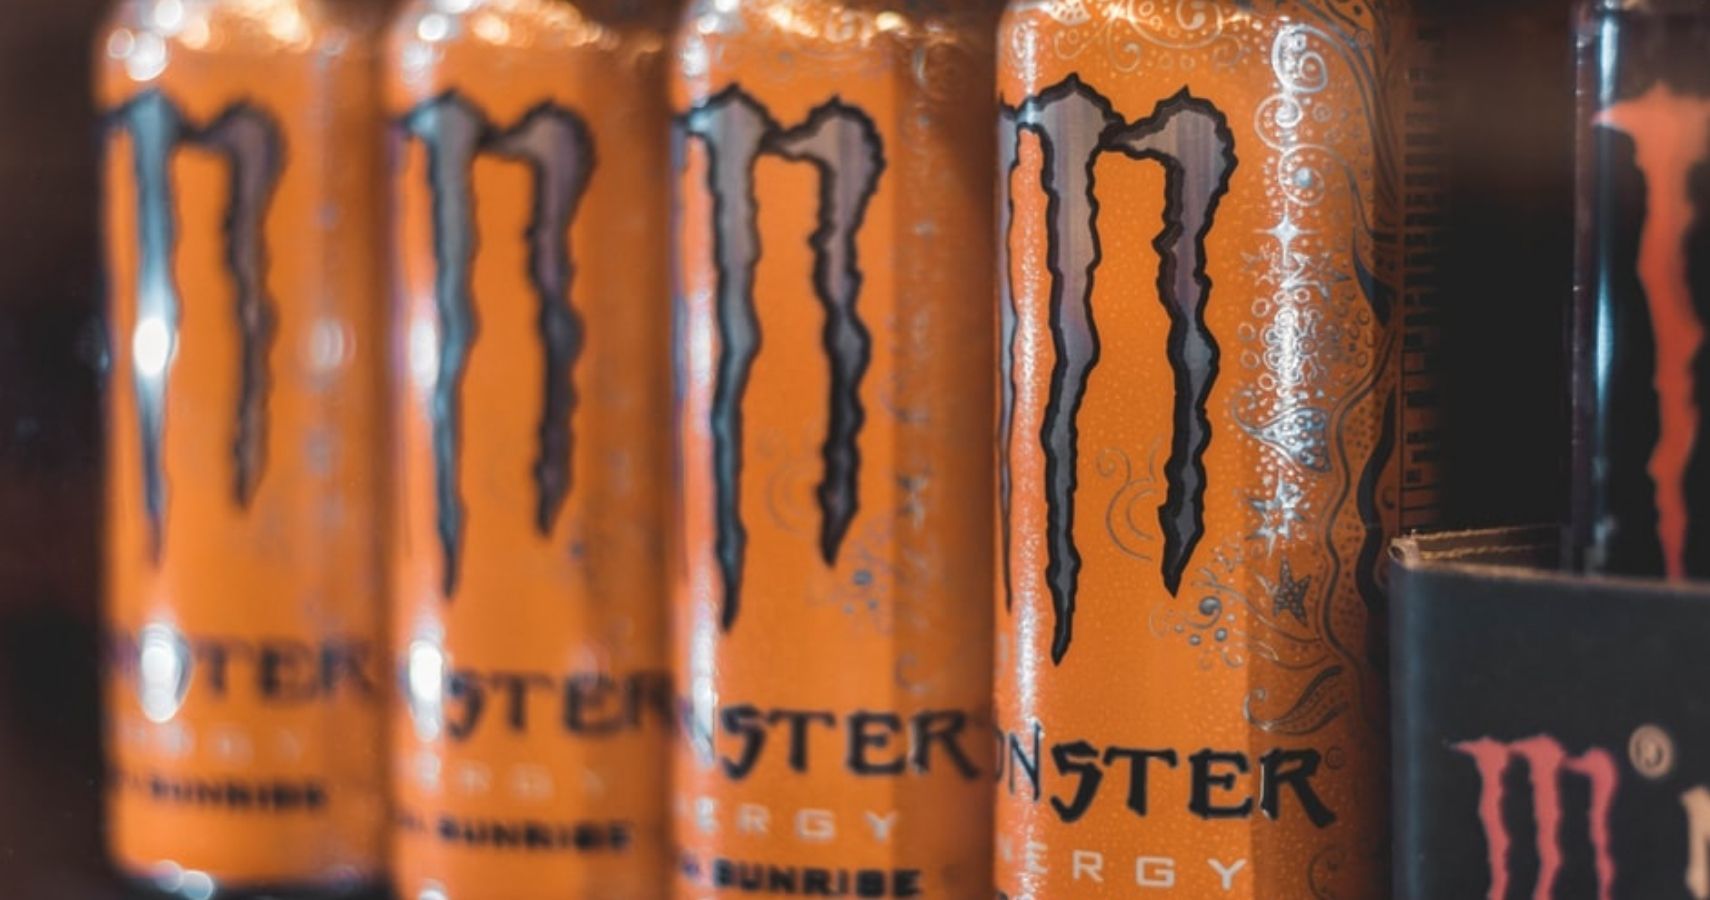 Energy drinks link to miscarriage